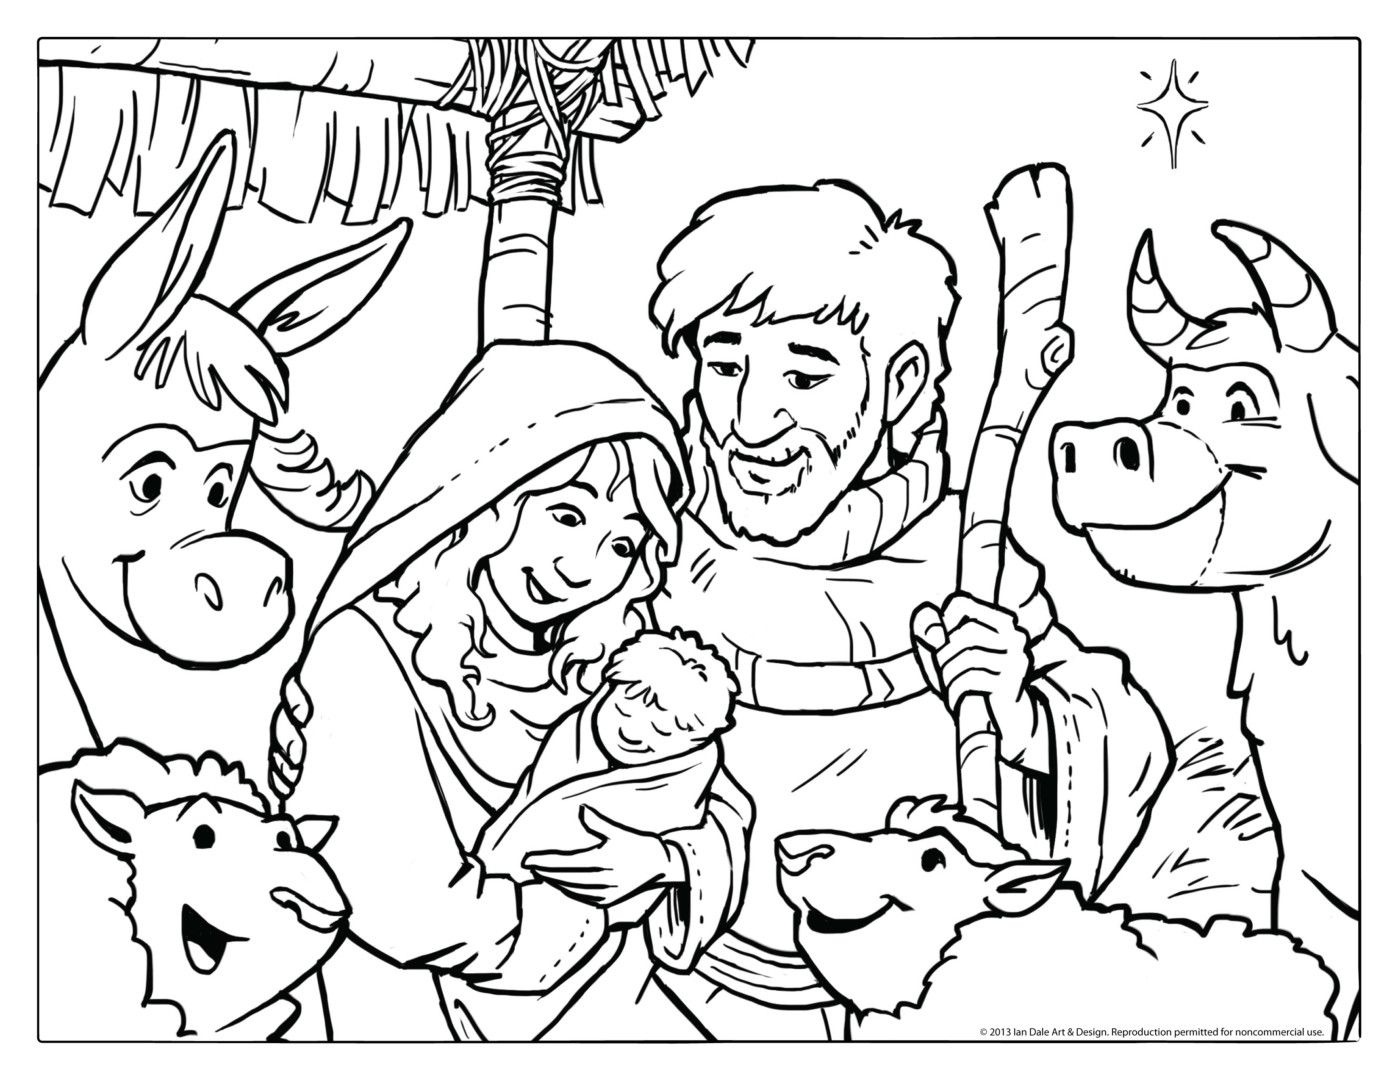 Coloring Pages : Nativity Scene Coloring Page Foroolers Of Number - Free Printable Pictures Of Nativity Scenes